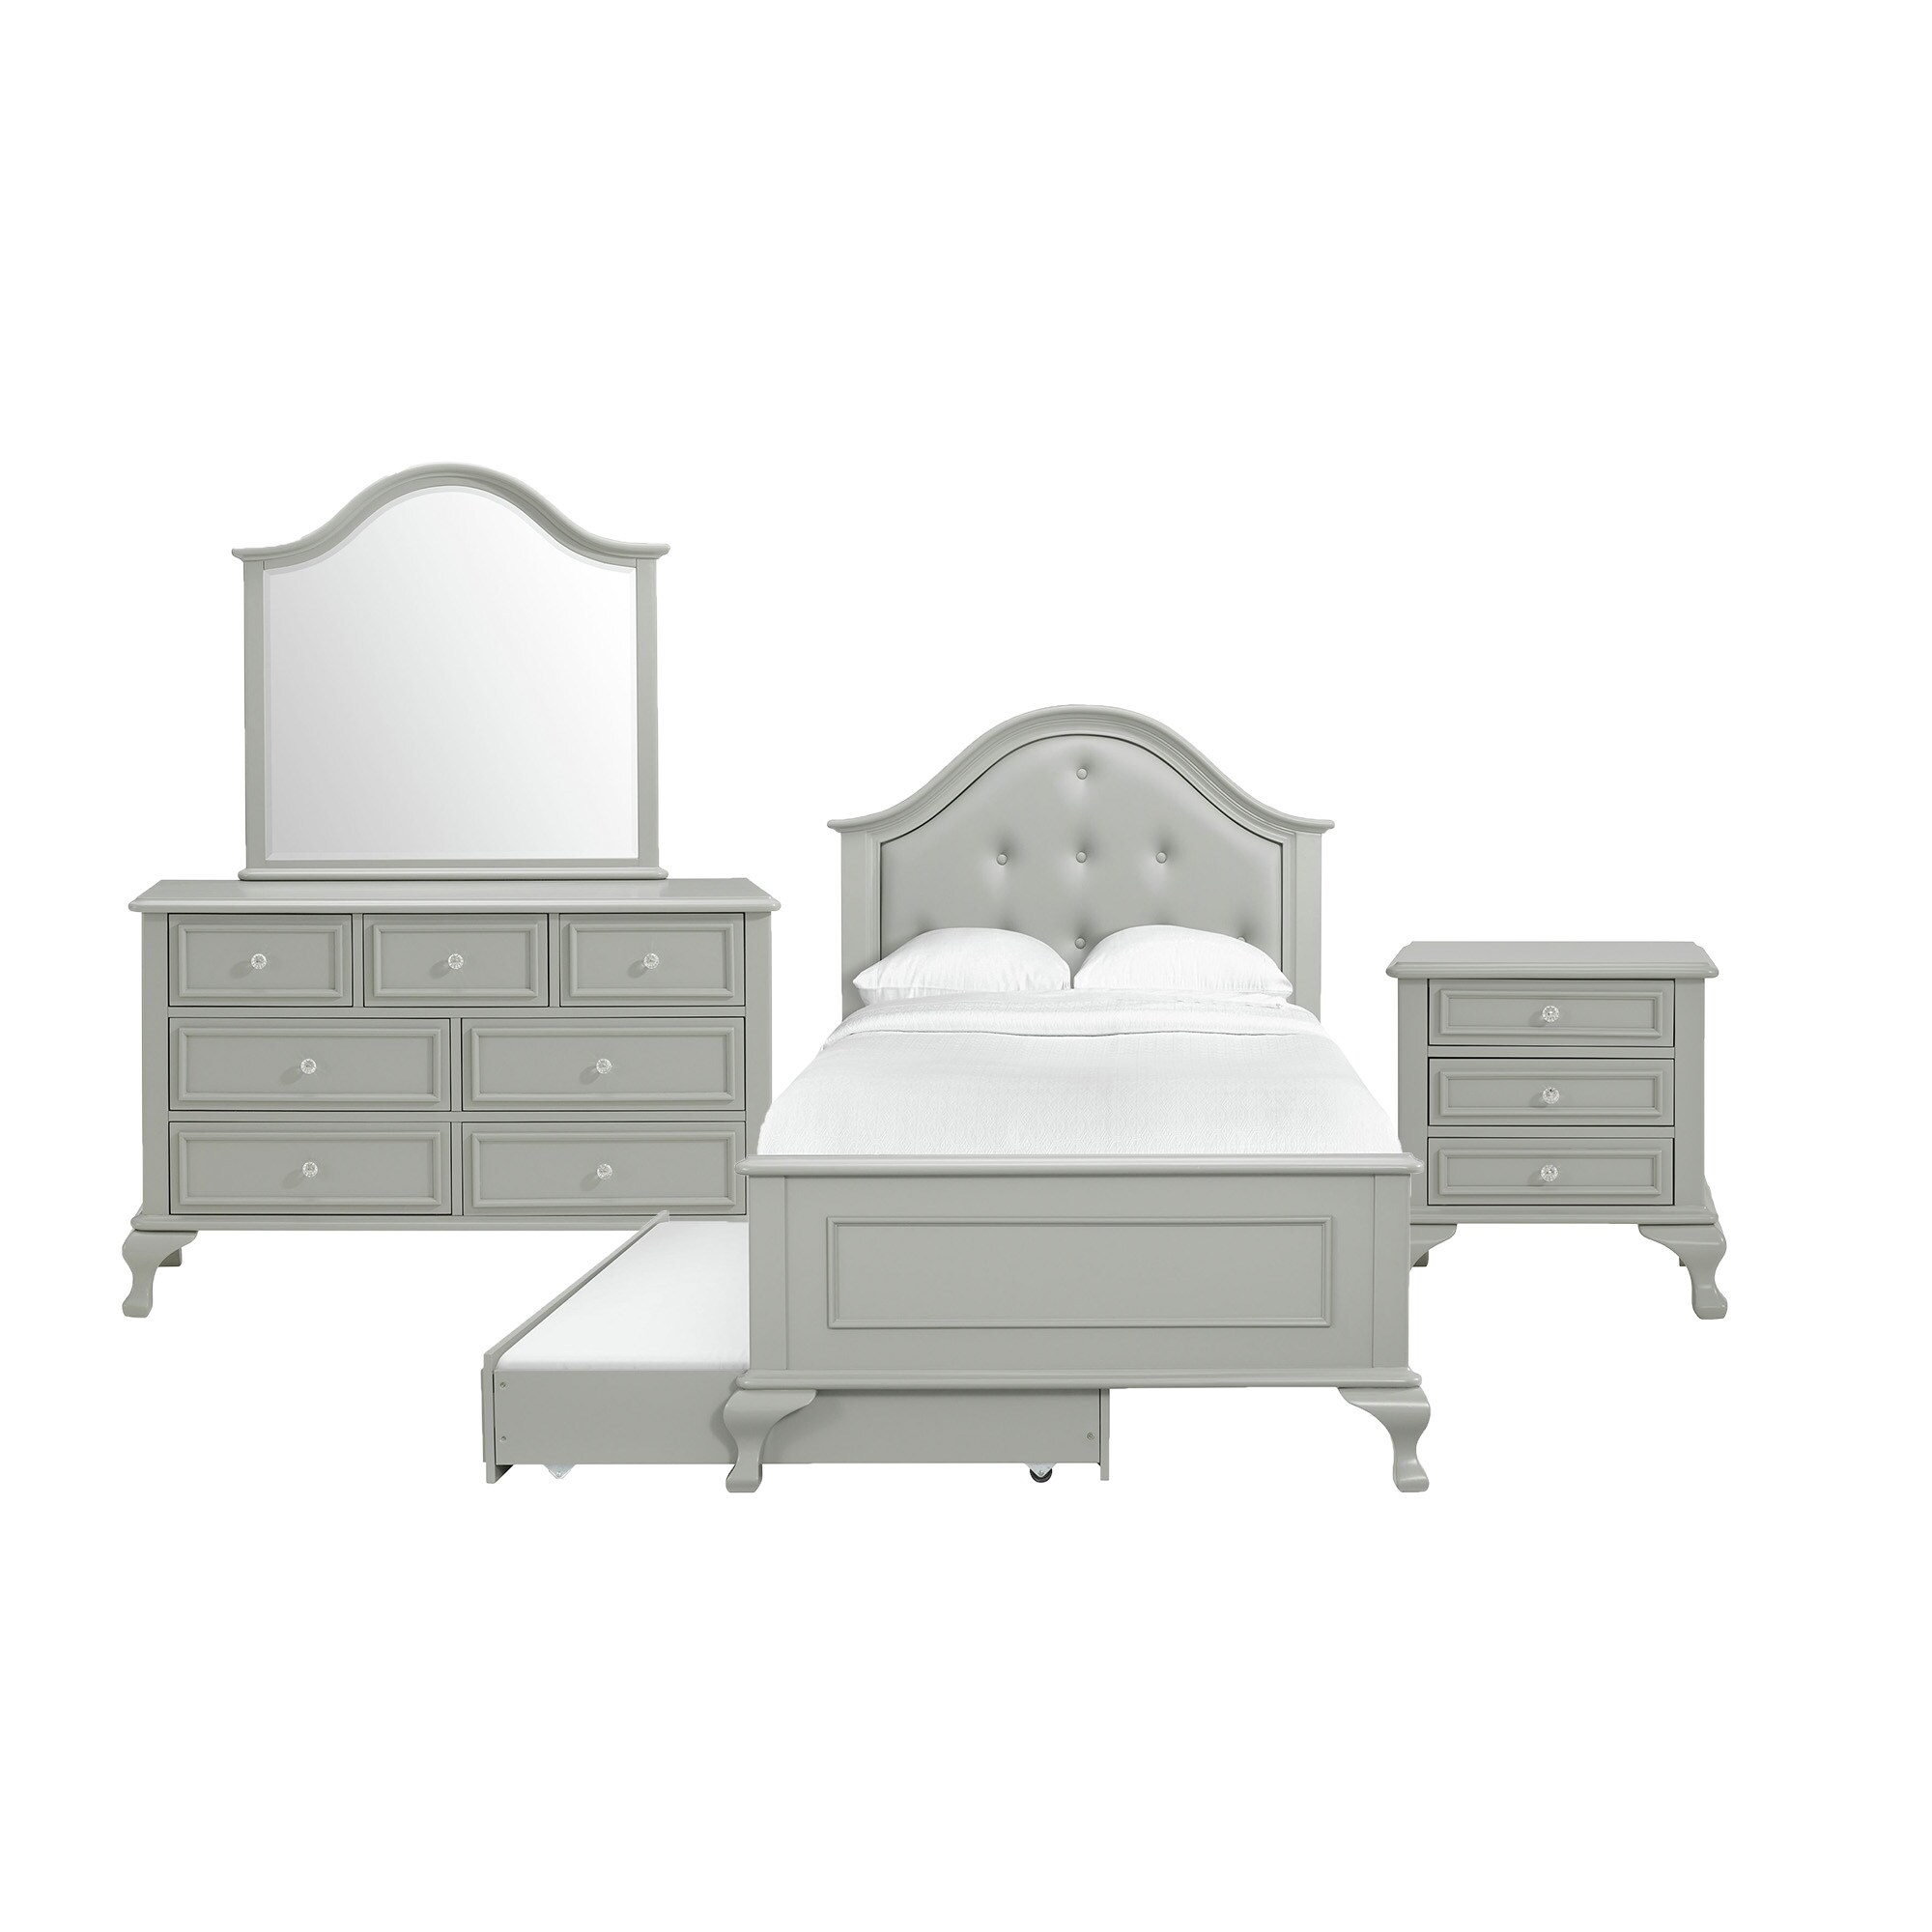 Picket House Furnishings Jenna Twin Panel 4pc Bedroom Set in Grey | Under-Bed Storage | Trundle Included | ASTM F2057-19 Tested | Transitional Style -  JS300TTB4PC